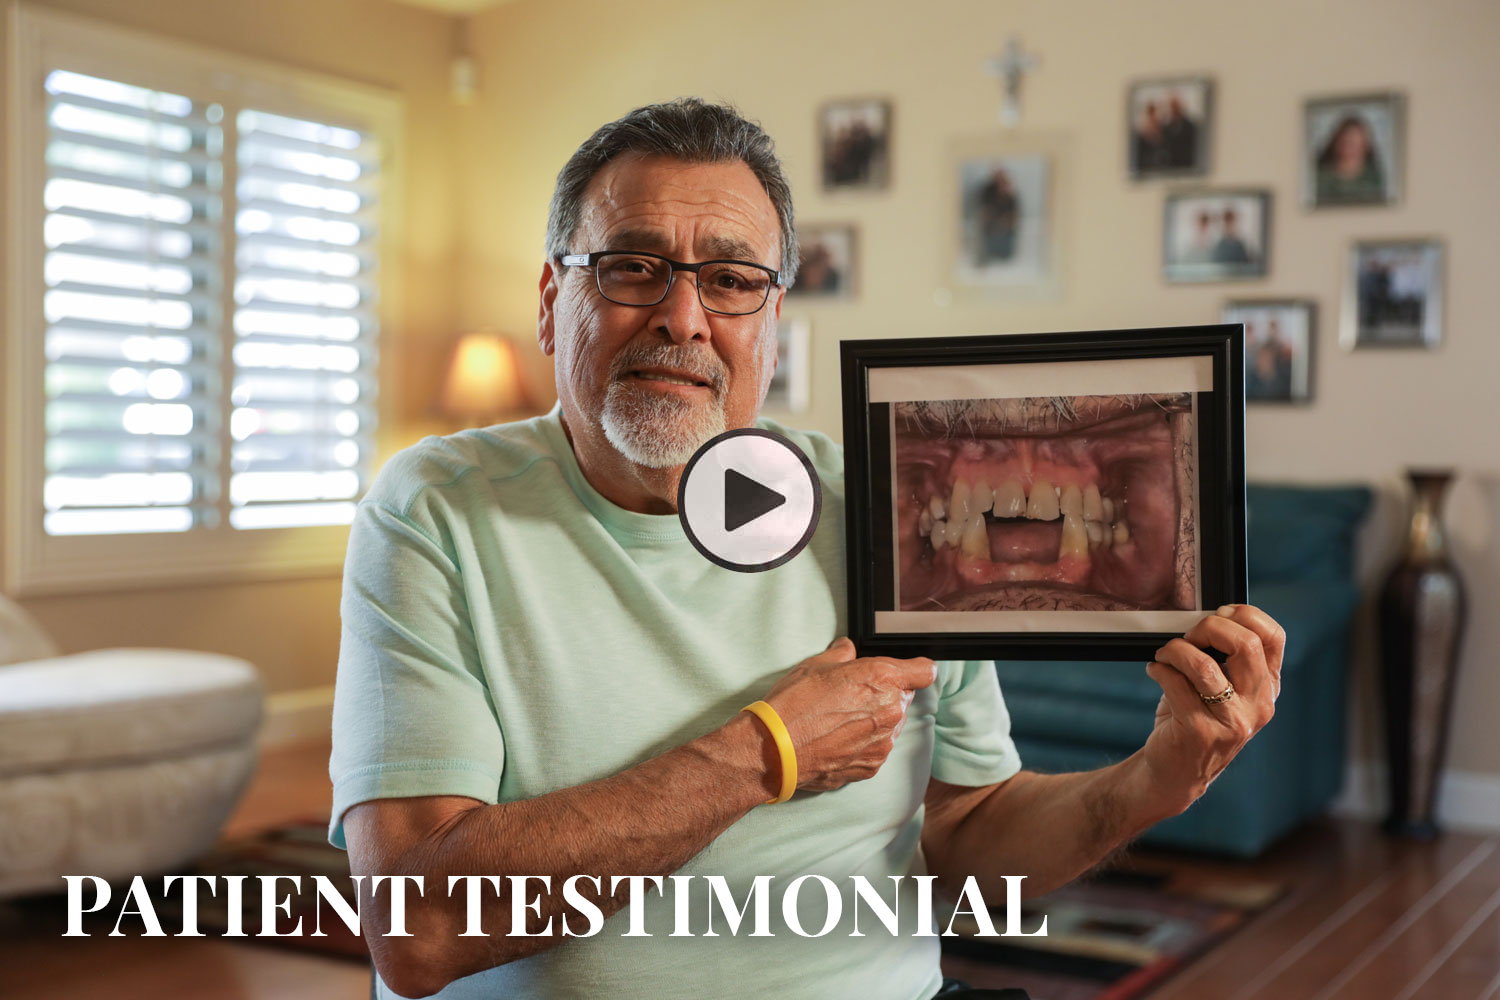 dr robescu patient testimonial video poster